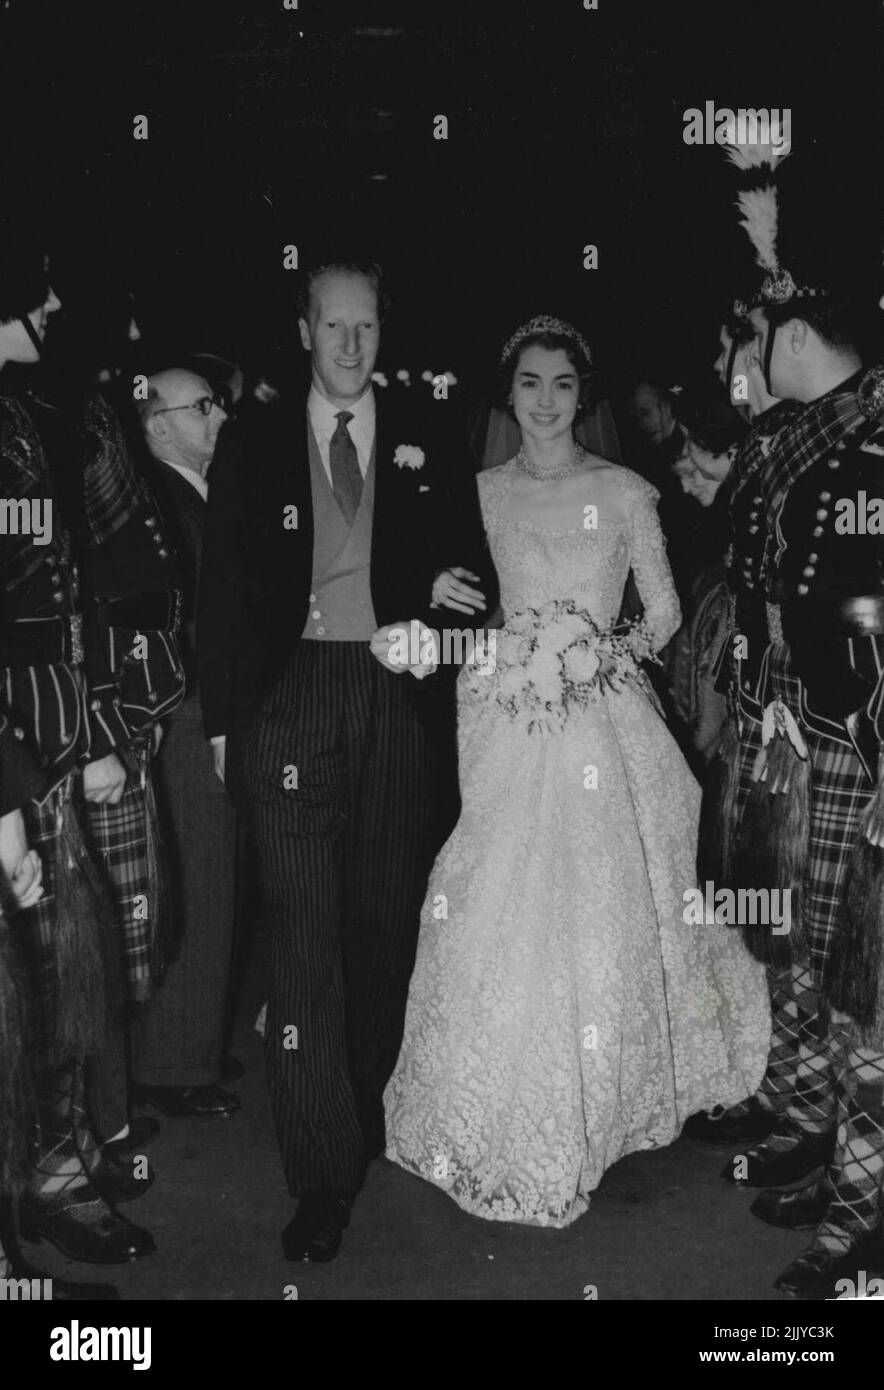 Photo shows: The bride and bridegroom leaving after the ceremony. The guard of honour is composed of pipers of the City of Edinburgh Police force. Royal Guests at Earl of Darlkieth's wedding. The marriage between the 29 years old Earl of Dalkeith, son and heir of the Duke and Duchess of Buccleuch, and Miss Jane McNeill, 22 years old daughter of Mr. John McNeill, Q.C. and Mrs. McNeill, took place at St.Giles Cathedral, Edinburgh, Scotland. Queen Elizabeth with other members of the Royal Family were among the many guests. January 11, 1953. (Photo by Sport And General Press Agency Limited) Stock Photo